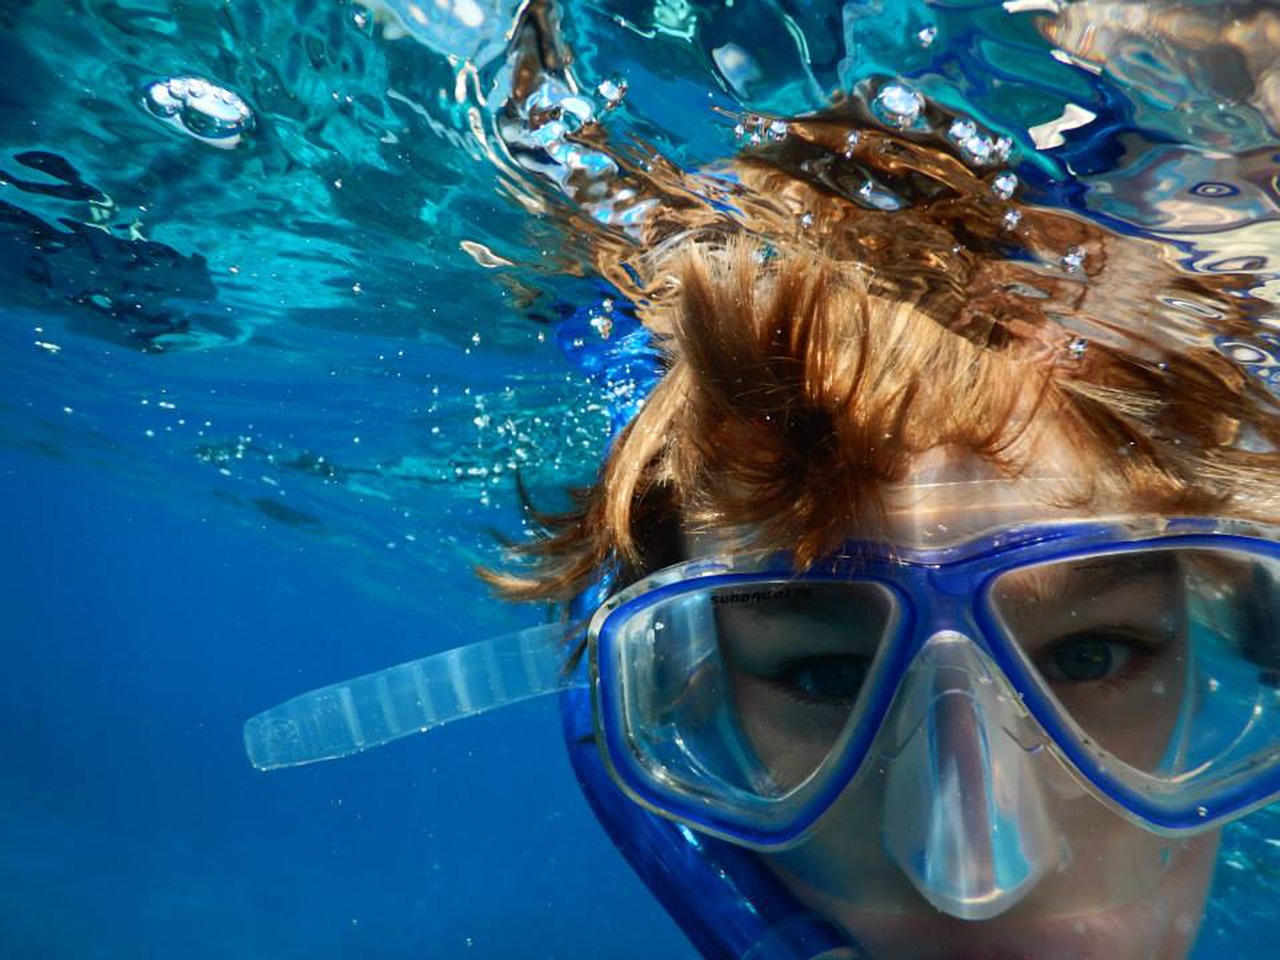 90 min snorkel tour - not currently running